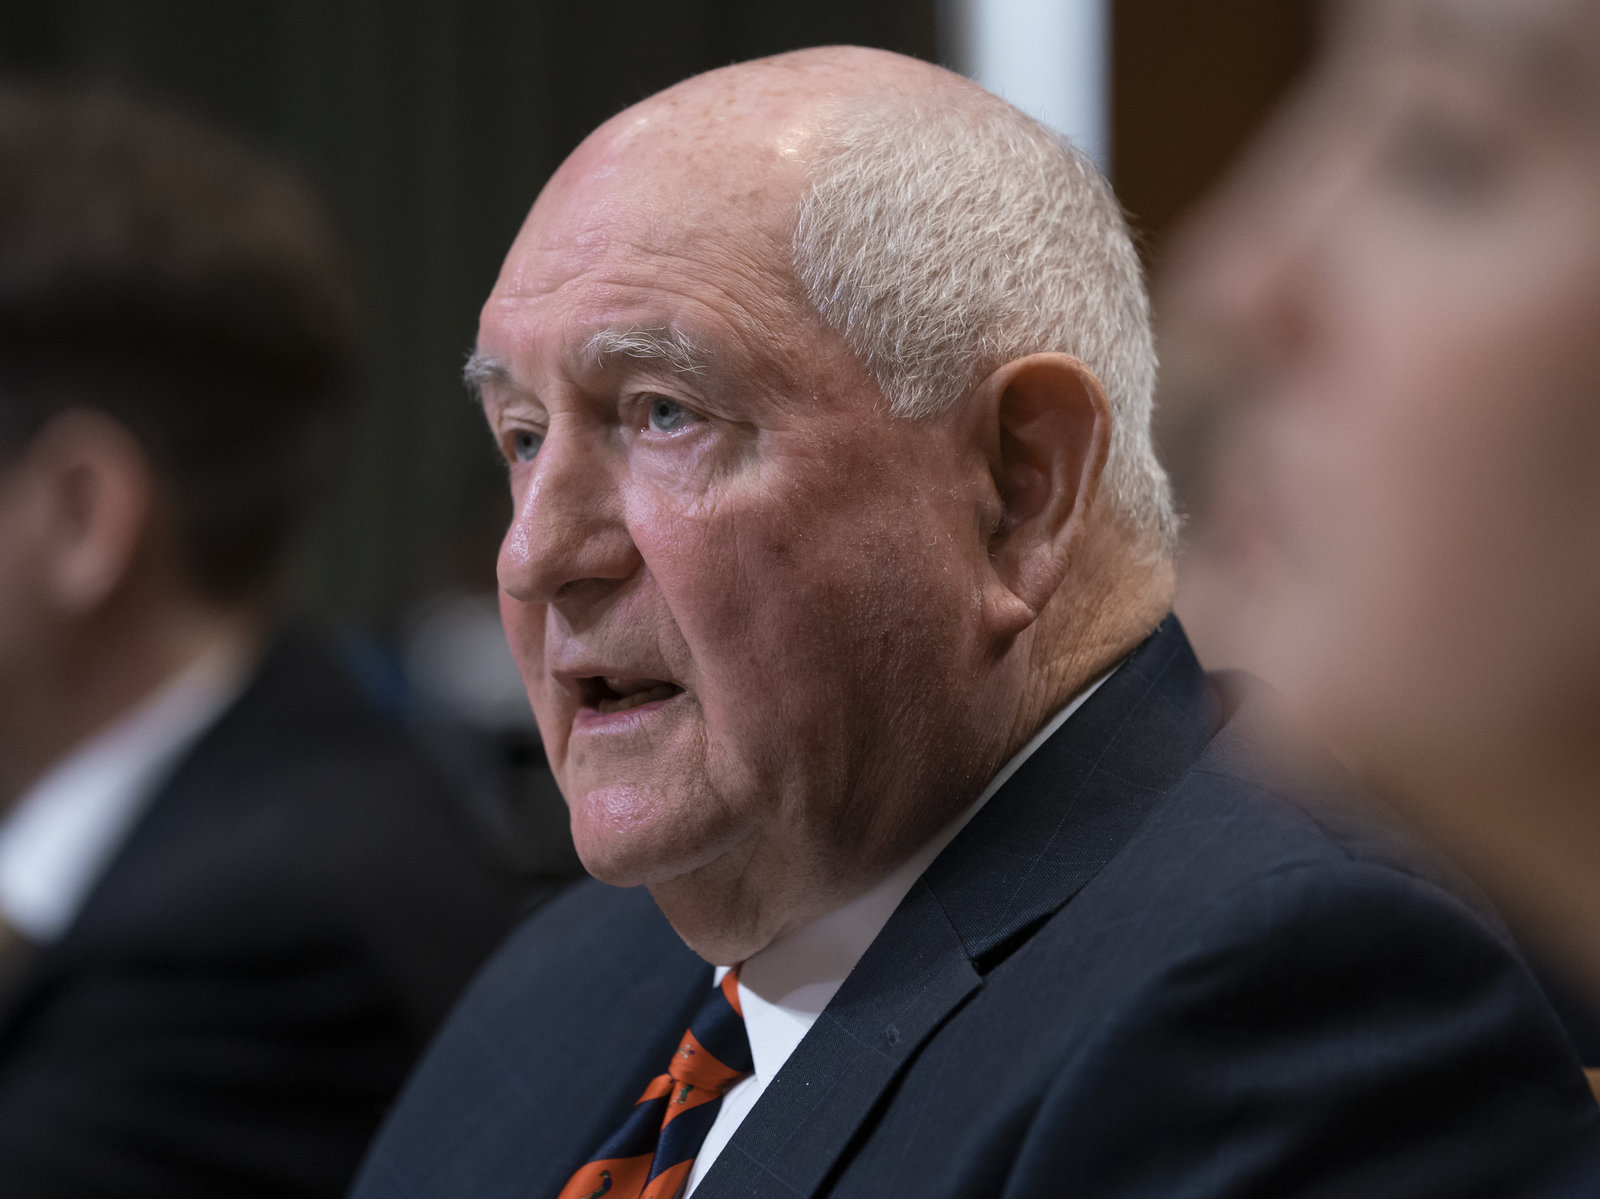 Secretary of Agriculture Sonny Perdue, shown here on Capitol Hill in April 2019, announced in June 2019 that most staff from two USDA research agencies were being relocated to the Kansas City region. The American Federation of Government Employees said of the move, “Evidence suggests that the relocation of these agencies is an attempt to hollow out and dismantle USDA science that helps farmers and protects our food supply.” Photo: J. Scott Applewhite / AP